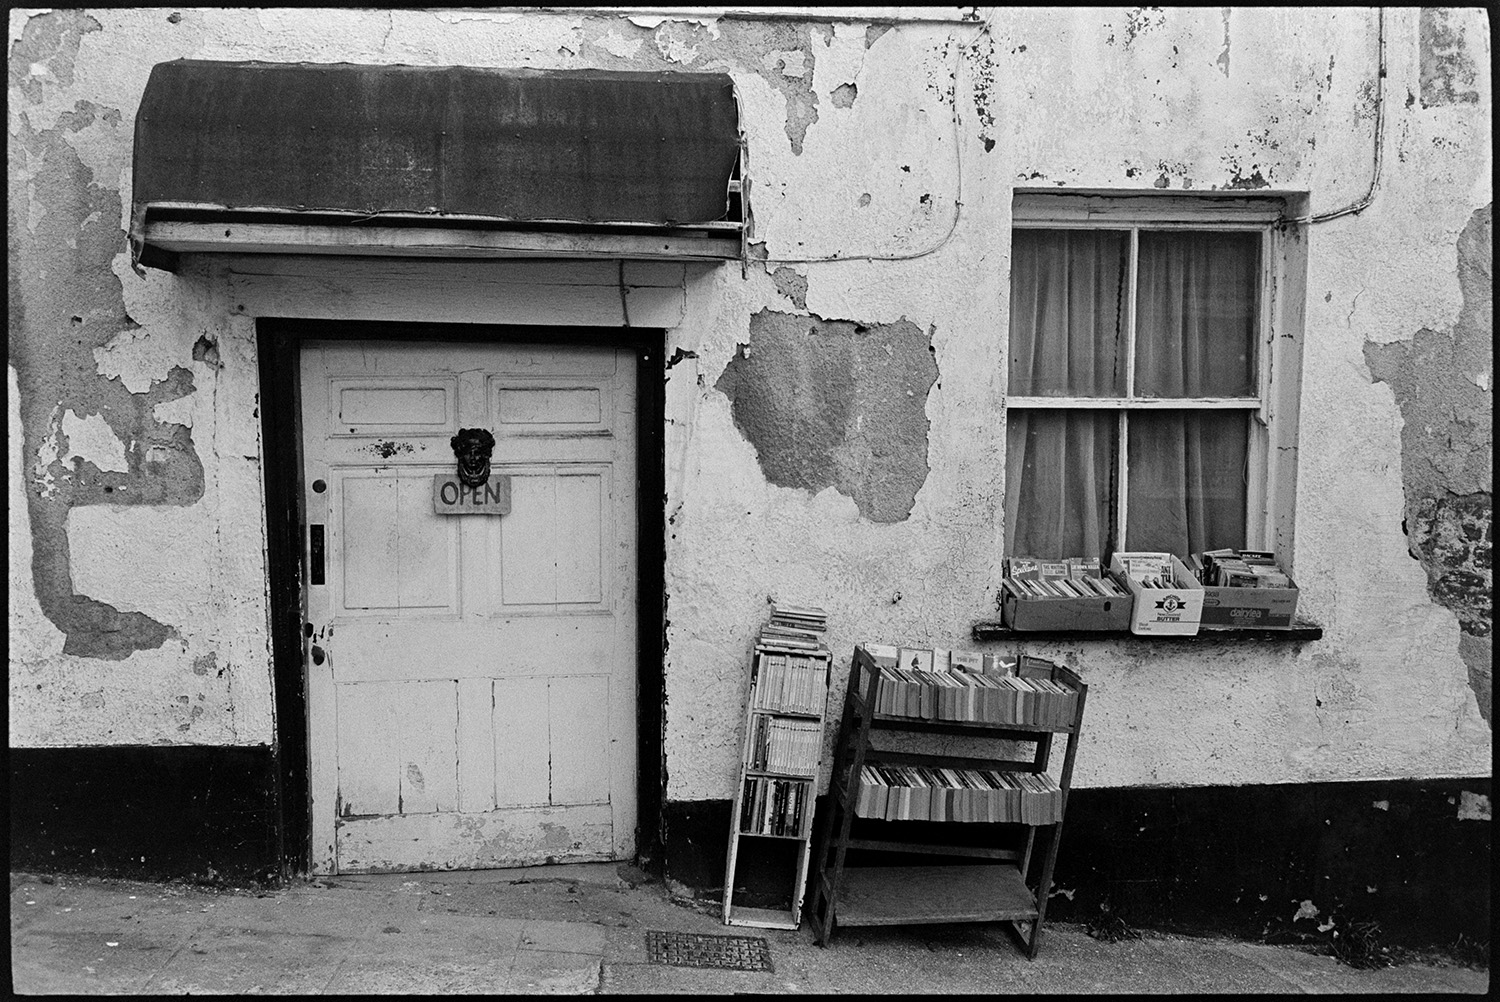 Street scenes with decaying front of antique shop, market.
[The front of a house or antique shop with crumbling plaster with books for sale outside displayed on bookshelves and the windowsill, in Castle Street, Torrington  An open sign is on the door knocker and an awning is above the doorway.]